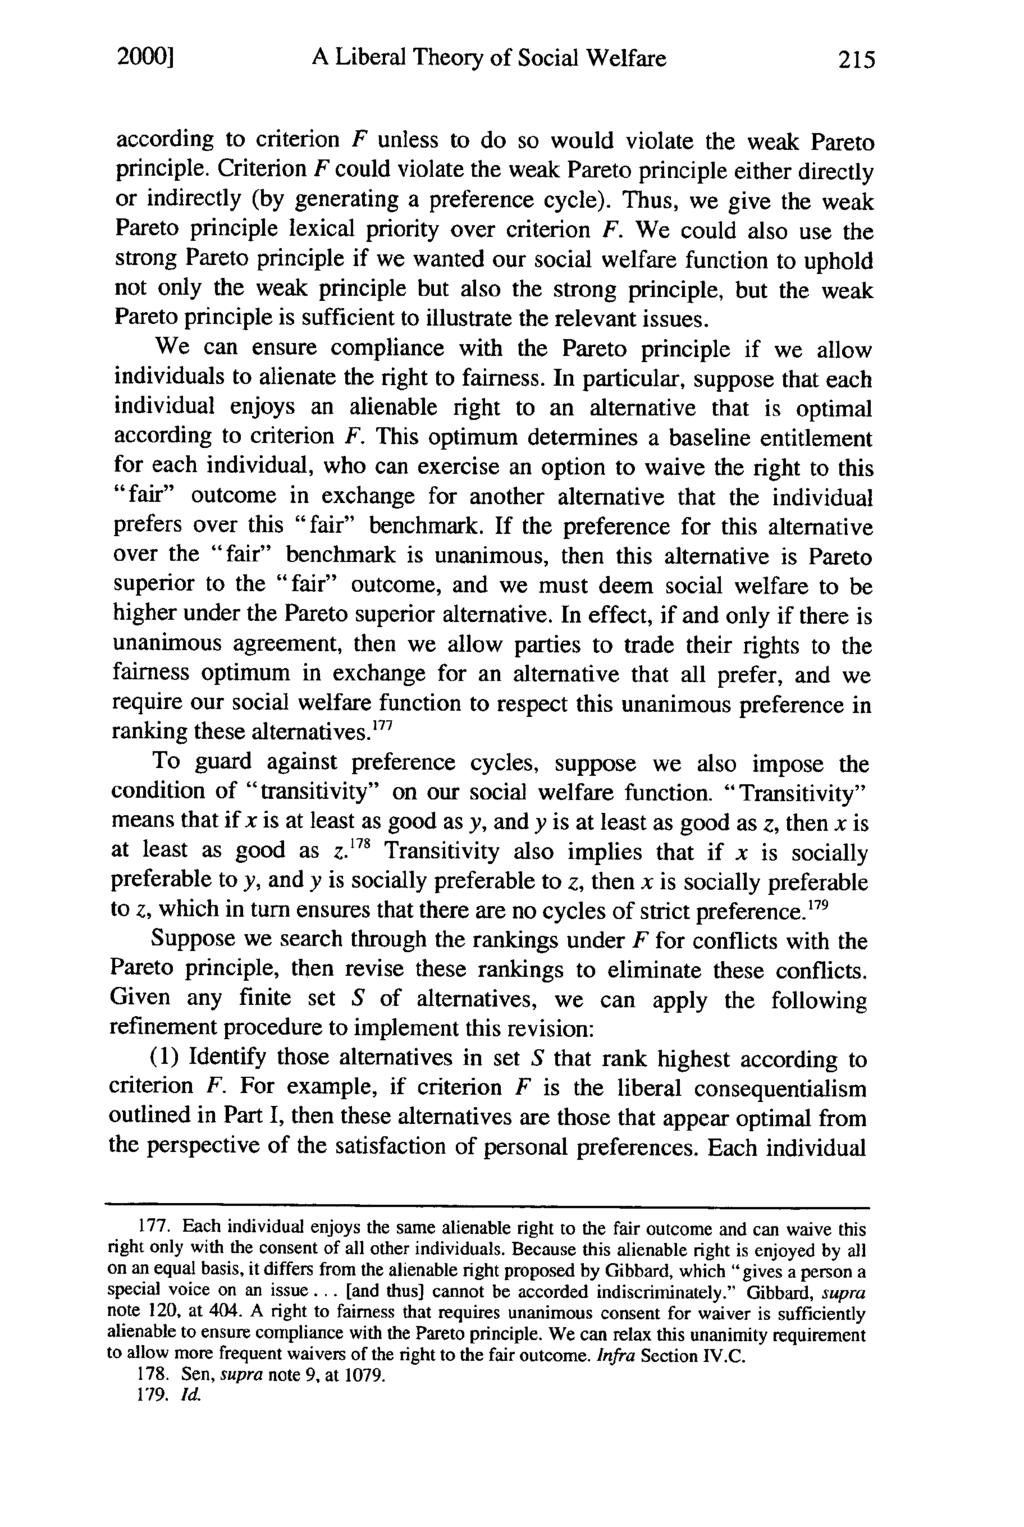 2000] A Liberal Theory of Social Welfare according to criterion F unless to do so would violate the weak Pareto principle.